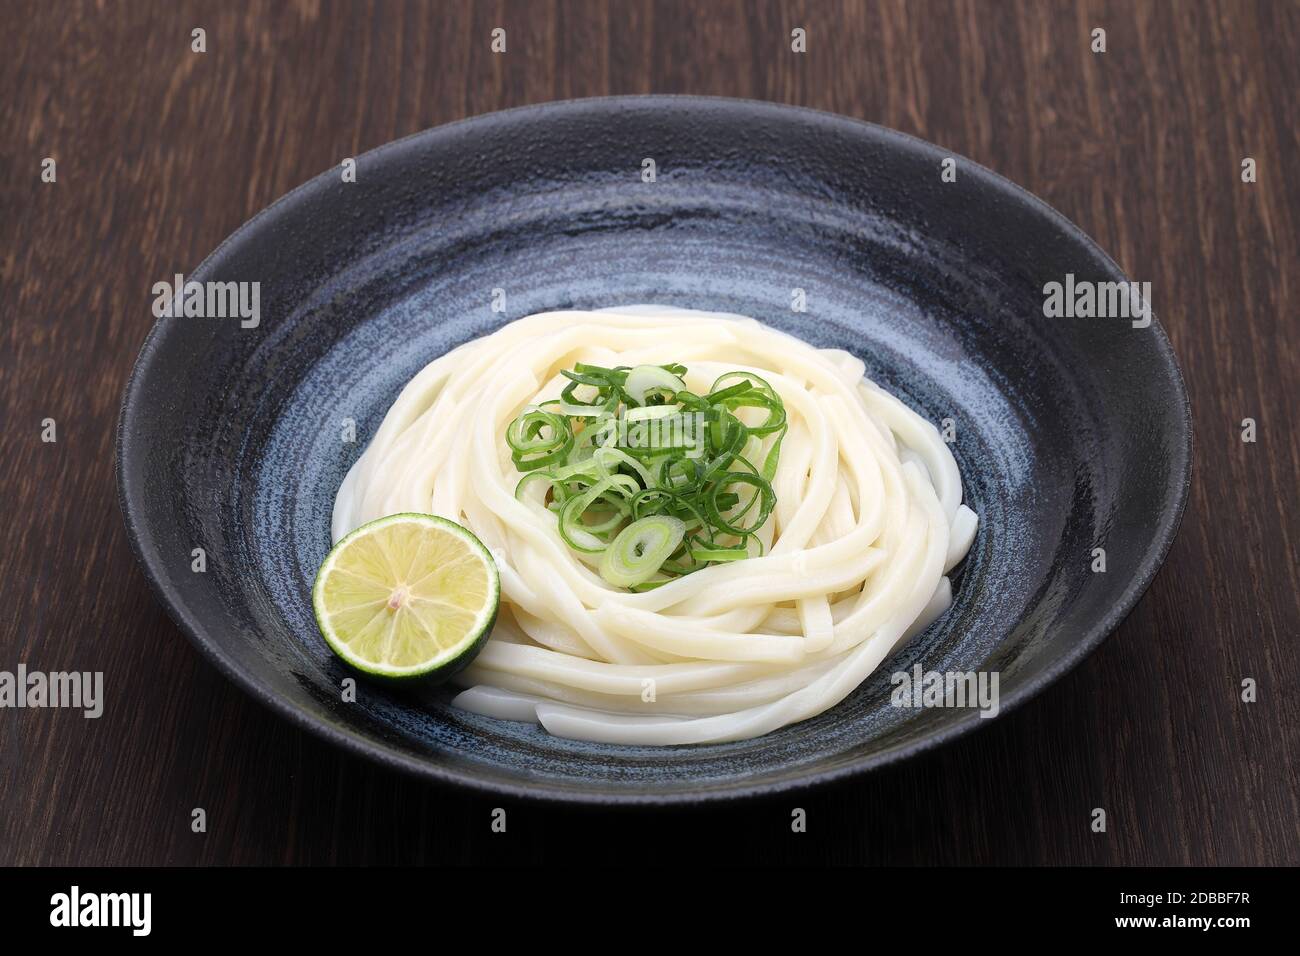 Japanese bukkake udon noodles in a bowl on wooden table Stock Photo